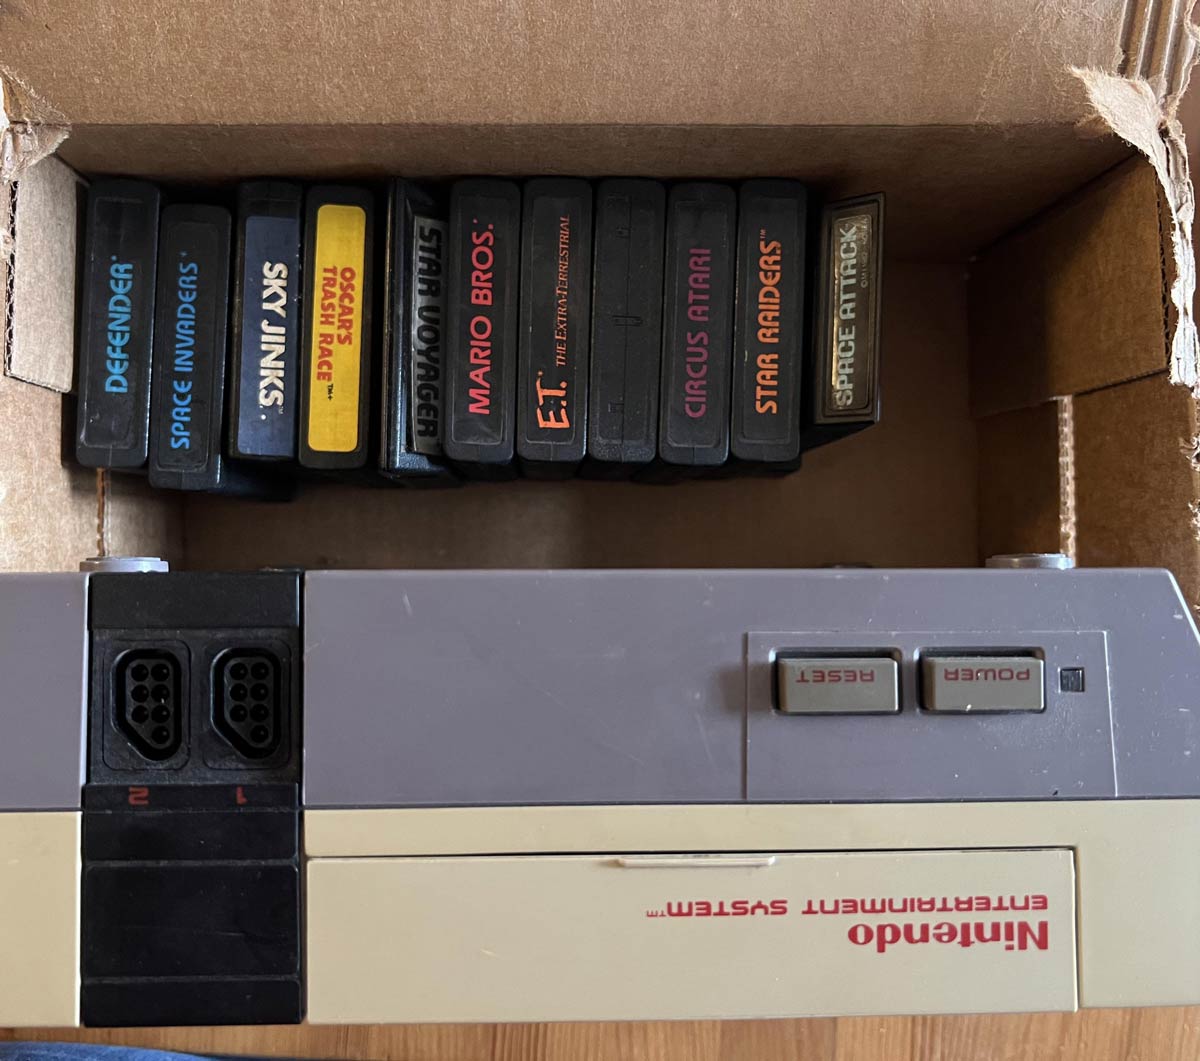 My mom told me she found the Nintendo and all the games. This was the box